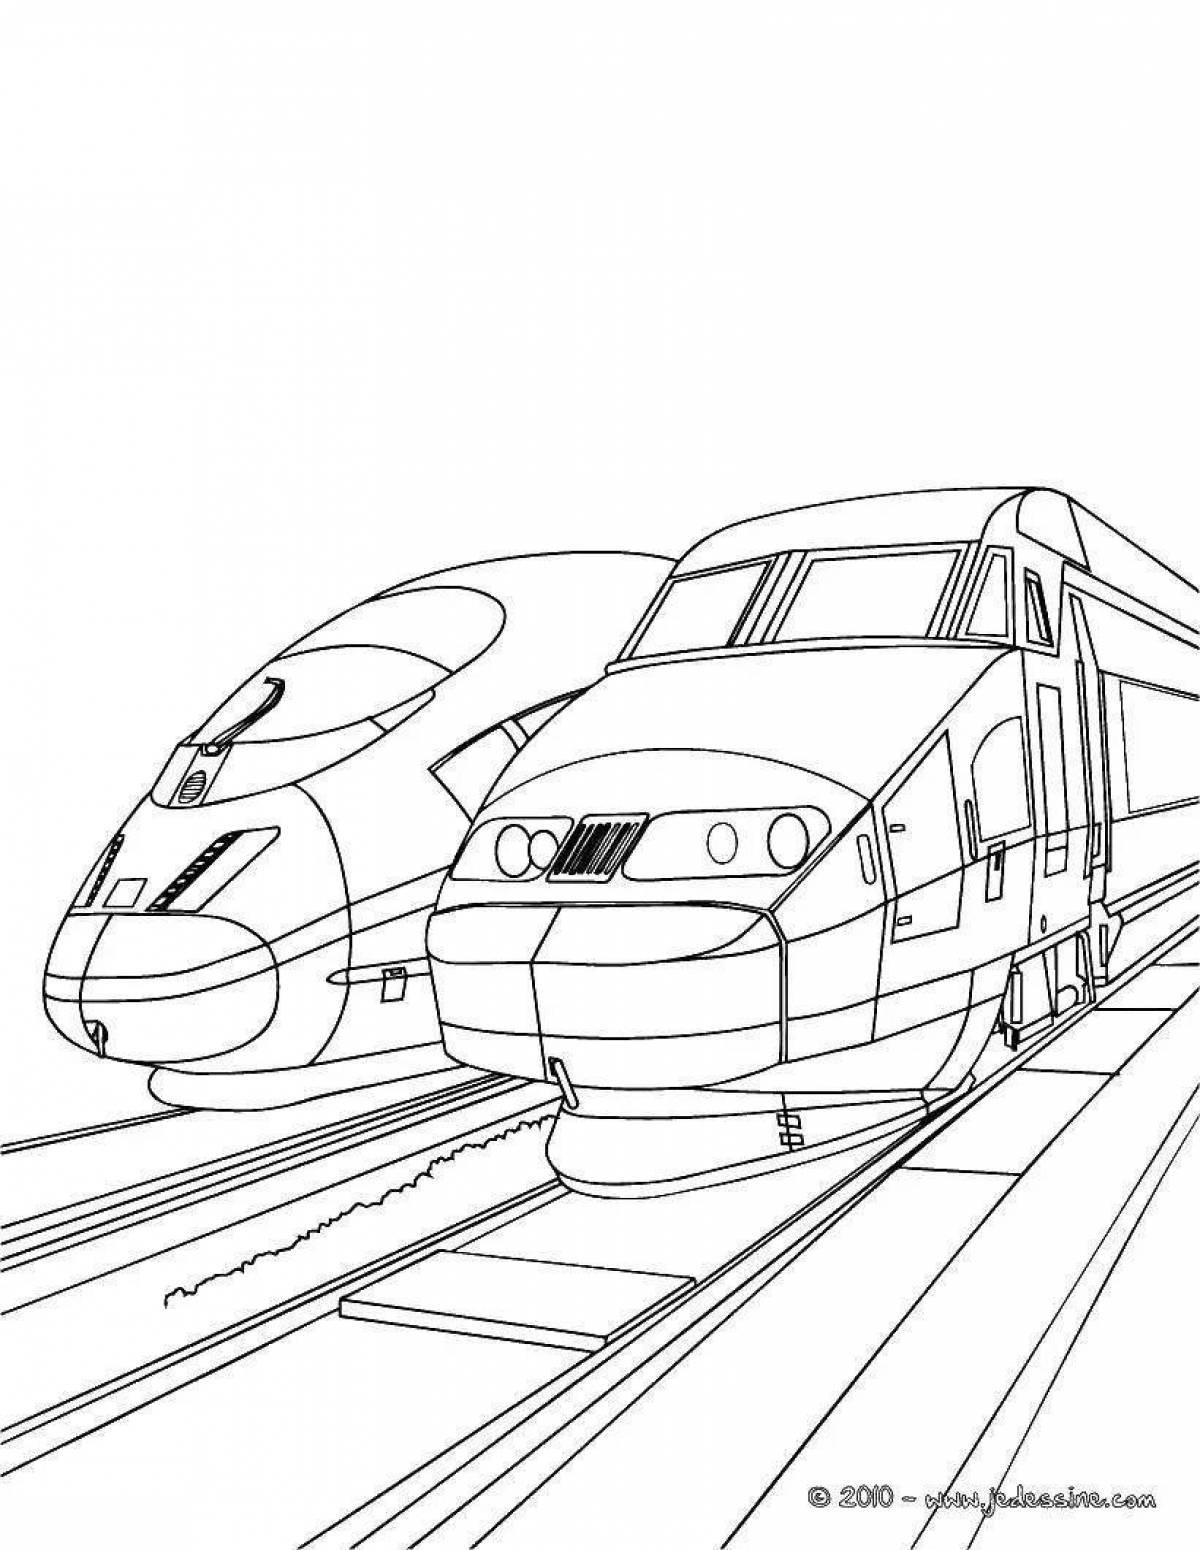 Coloring page festive Russian trains